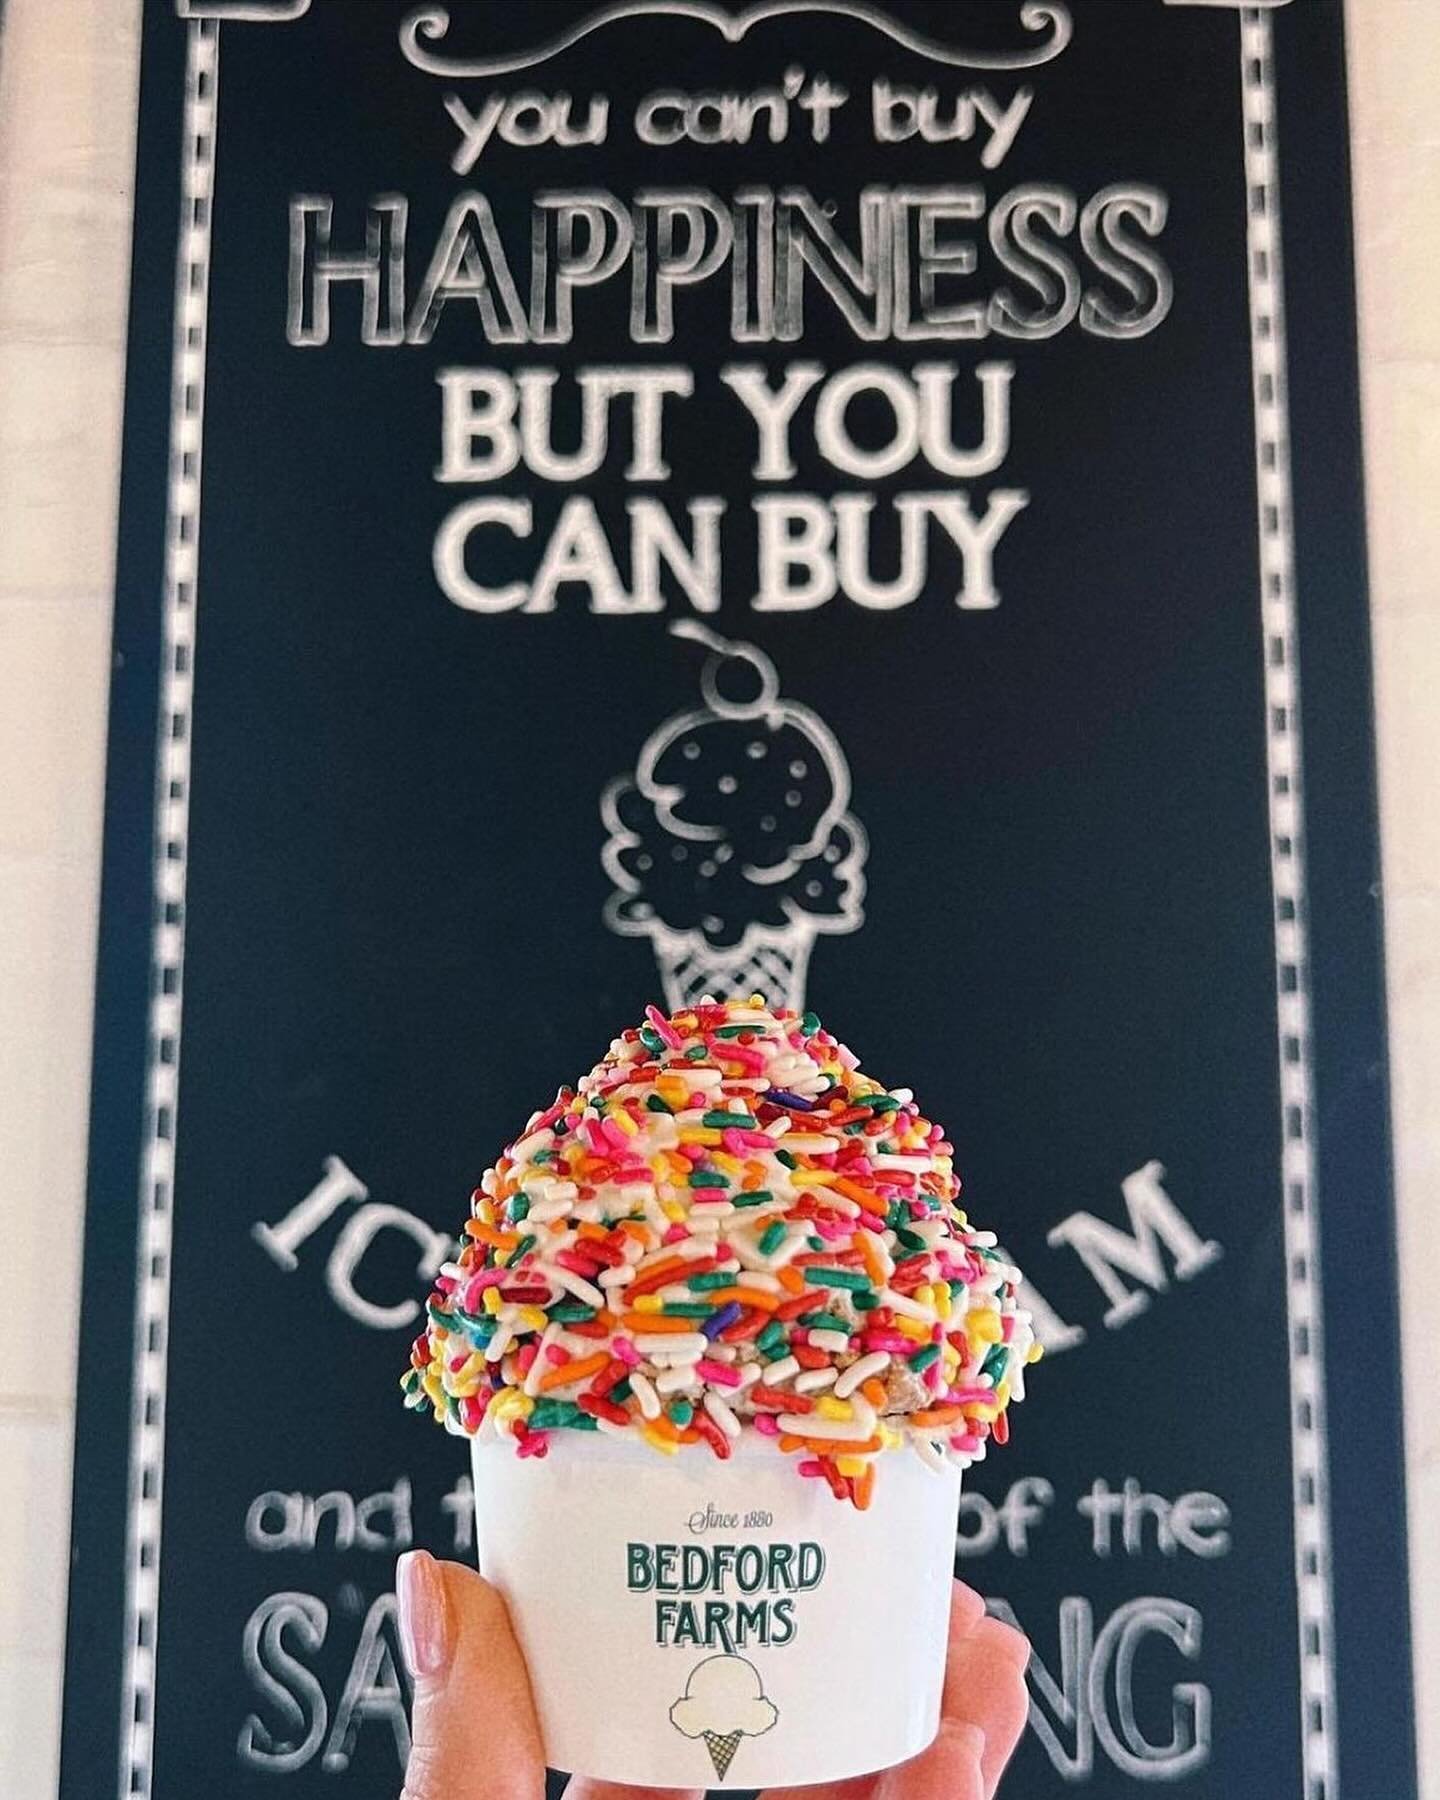 Sunny Friday + Long Weekend = 🍦🍦🍦

#gdfic #bedfordma #concordma #icecream

Photo credit: @tale.of.two.citiess